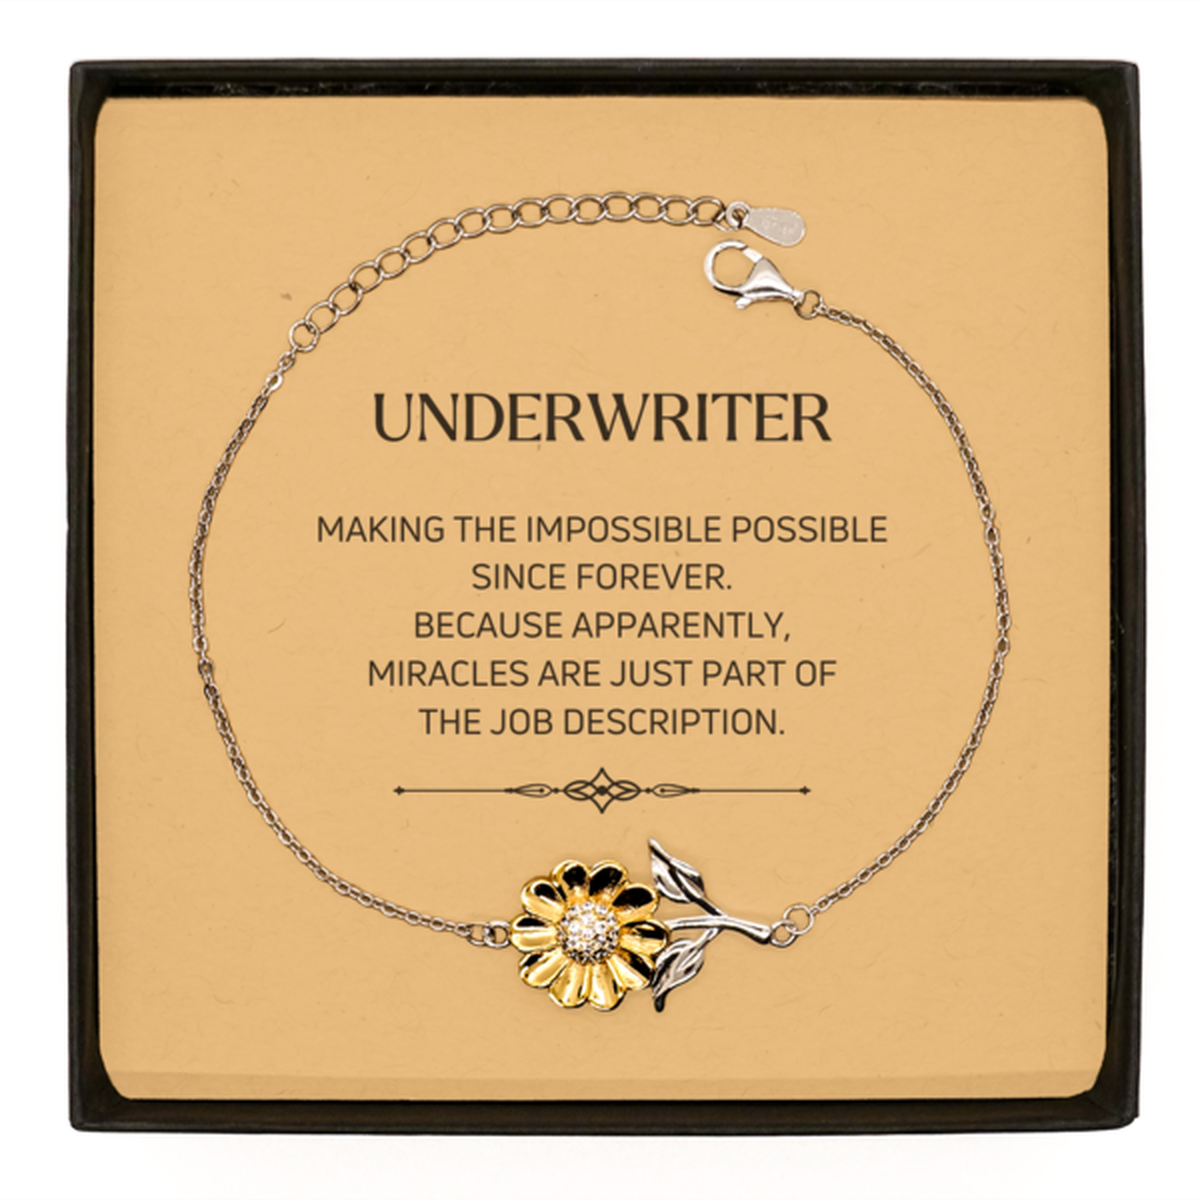 Funny Underwriter Gifts, Miracles are just part of the job description, Inspirational Birthday Sunflower Bracelet For Underwriter, Men, Women, Coworkers, Friends, Boss